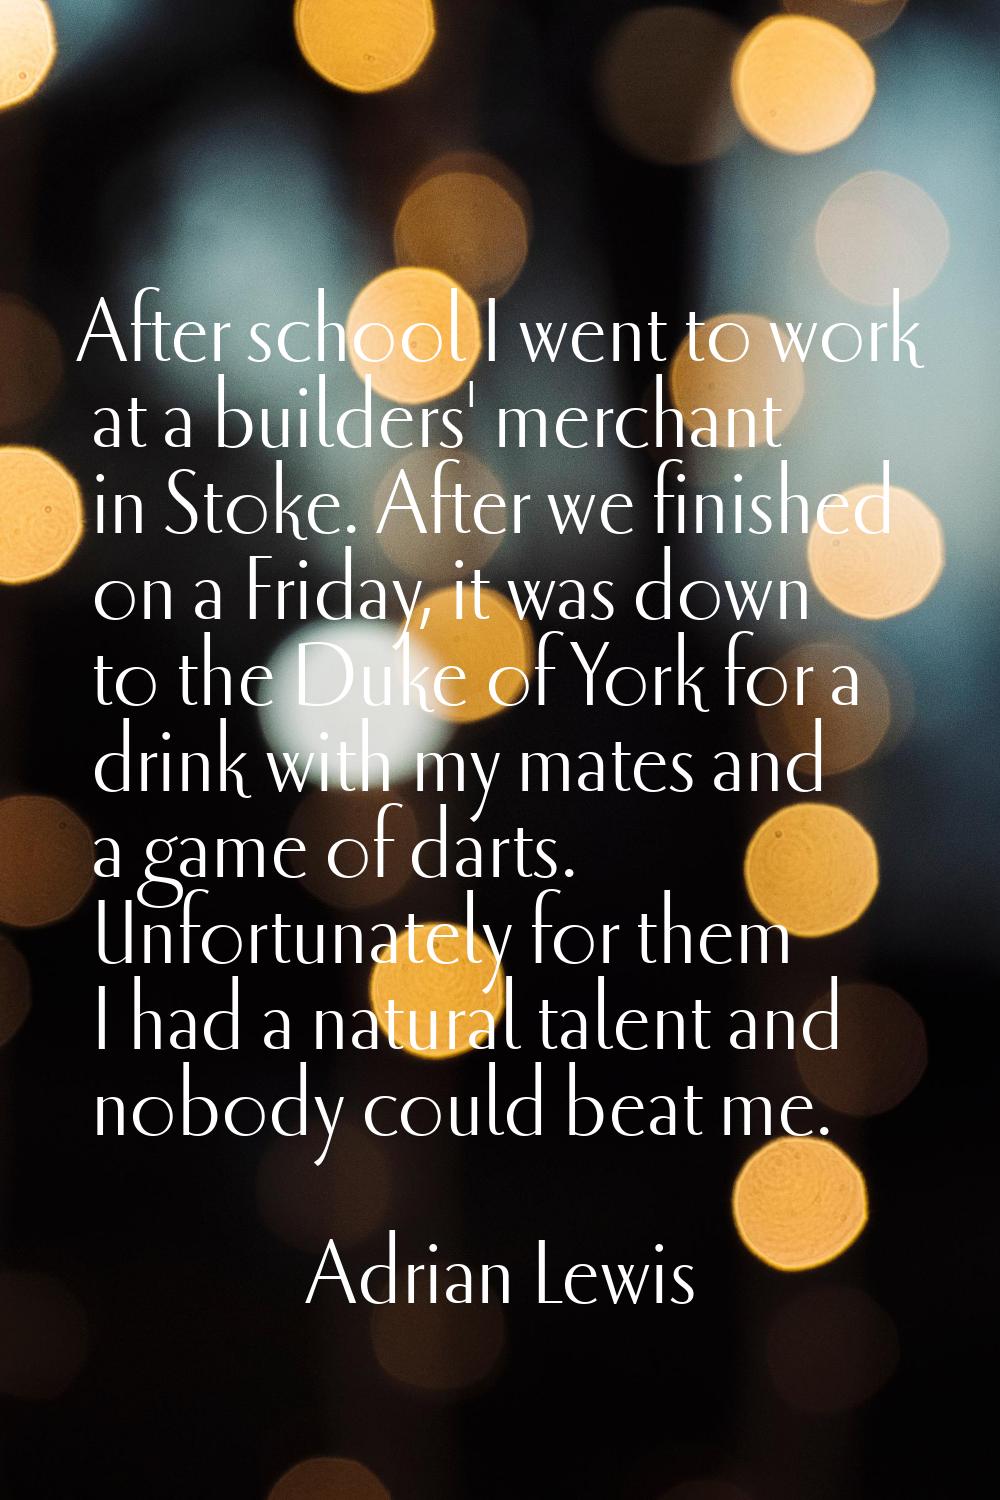 After school I went to work at a builders' merchant in Stoke. After we finished on a Friday, it was